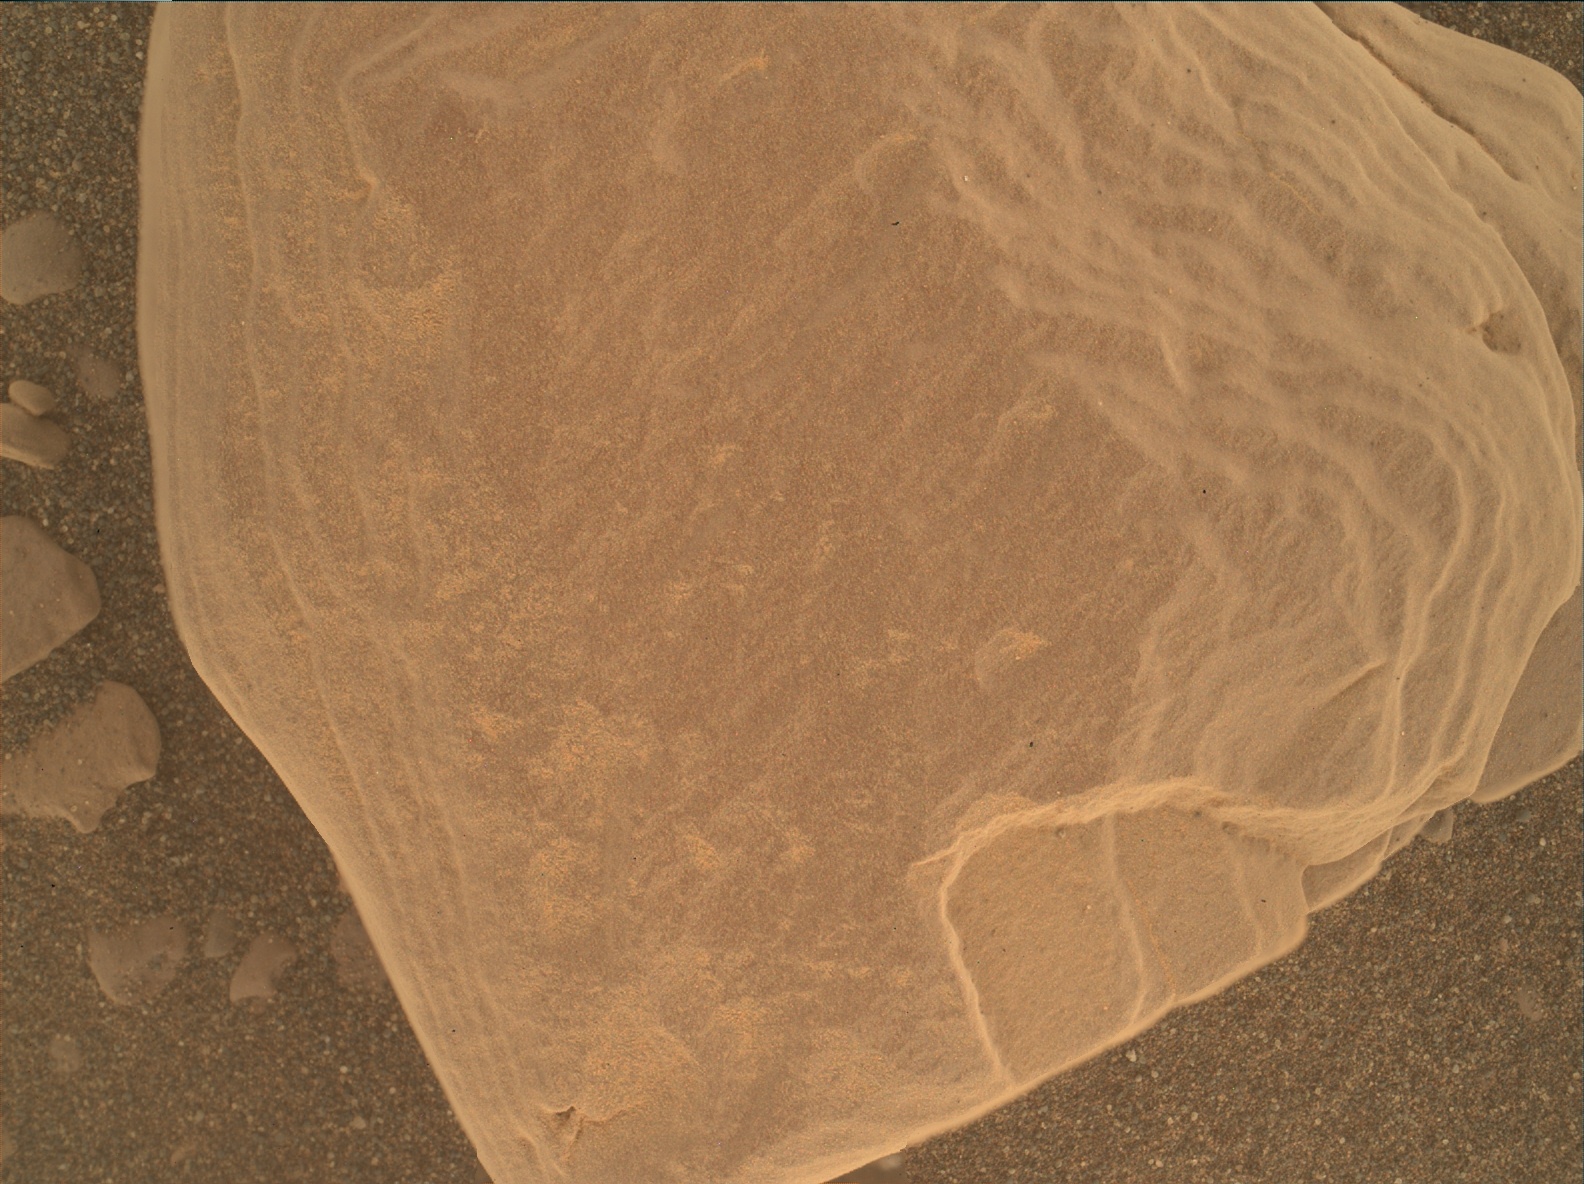 Nasa's Mars rover Curiosity acquired this image using its Mars Hand Lens Imager (MAHLI) on Sol 2434